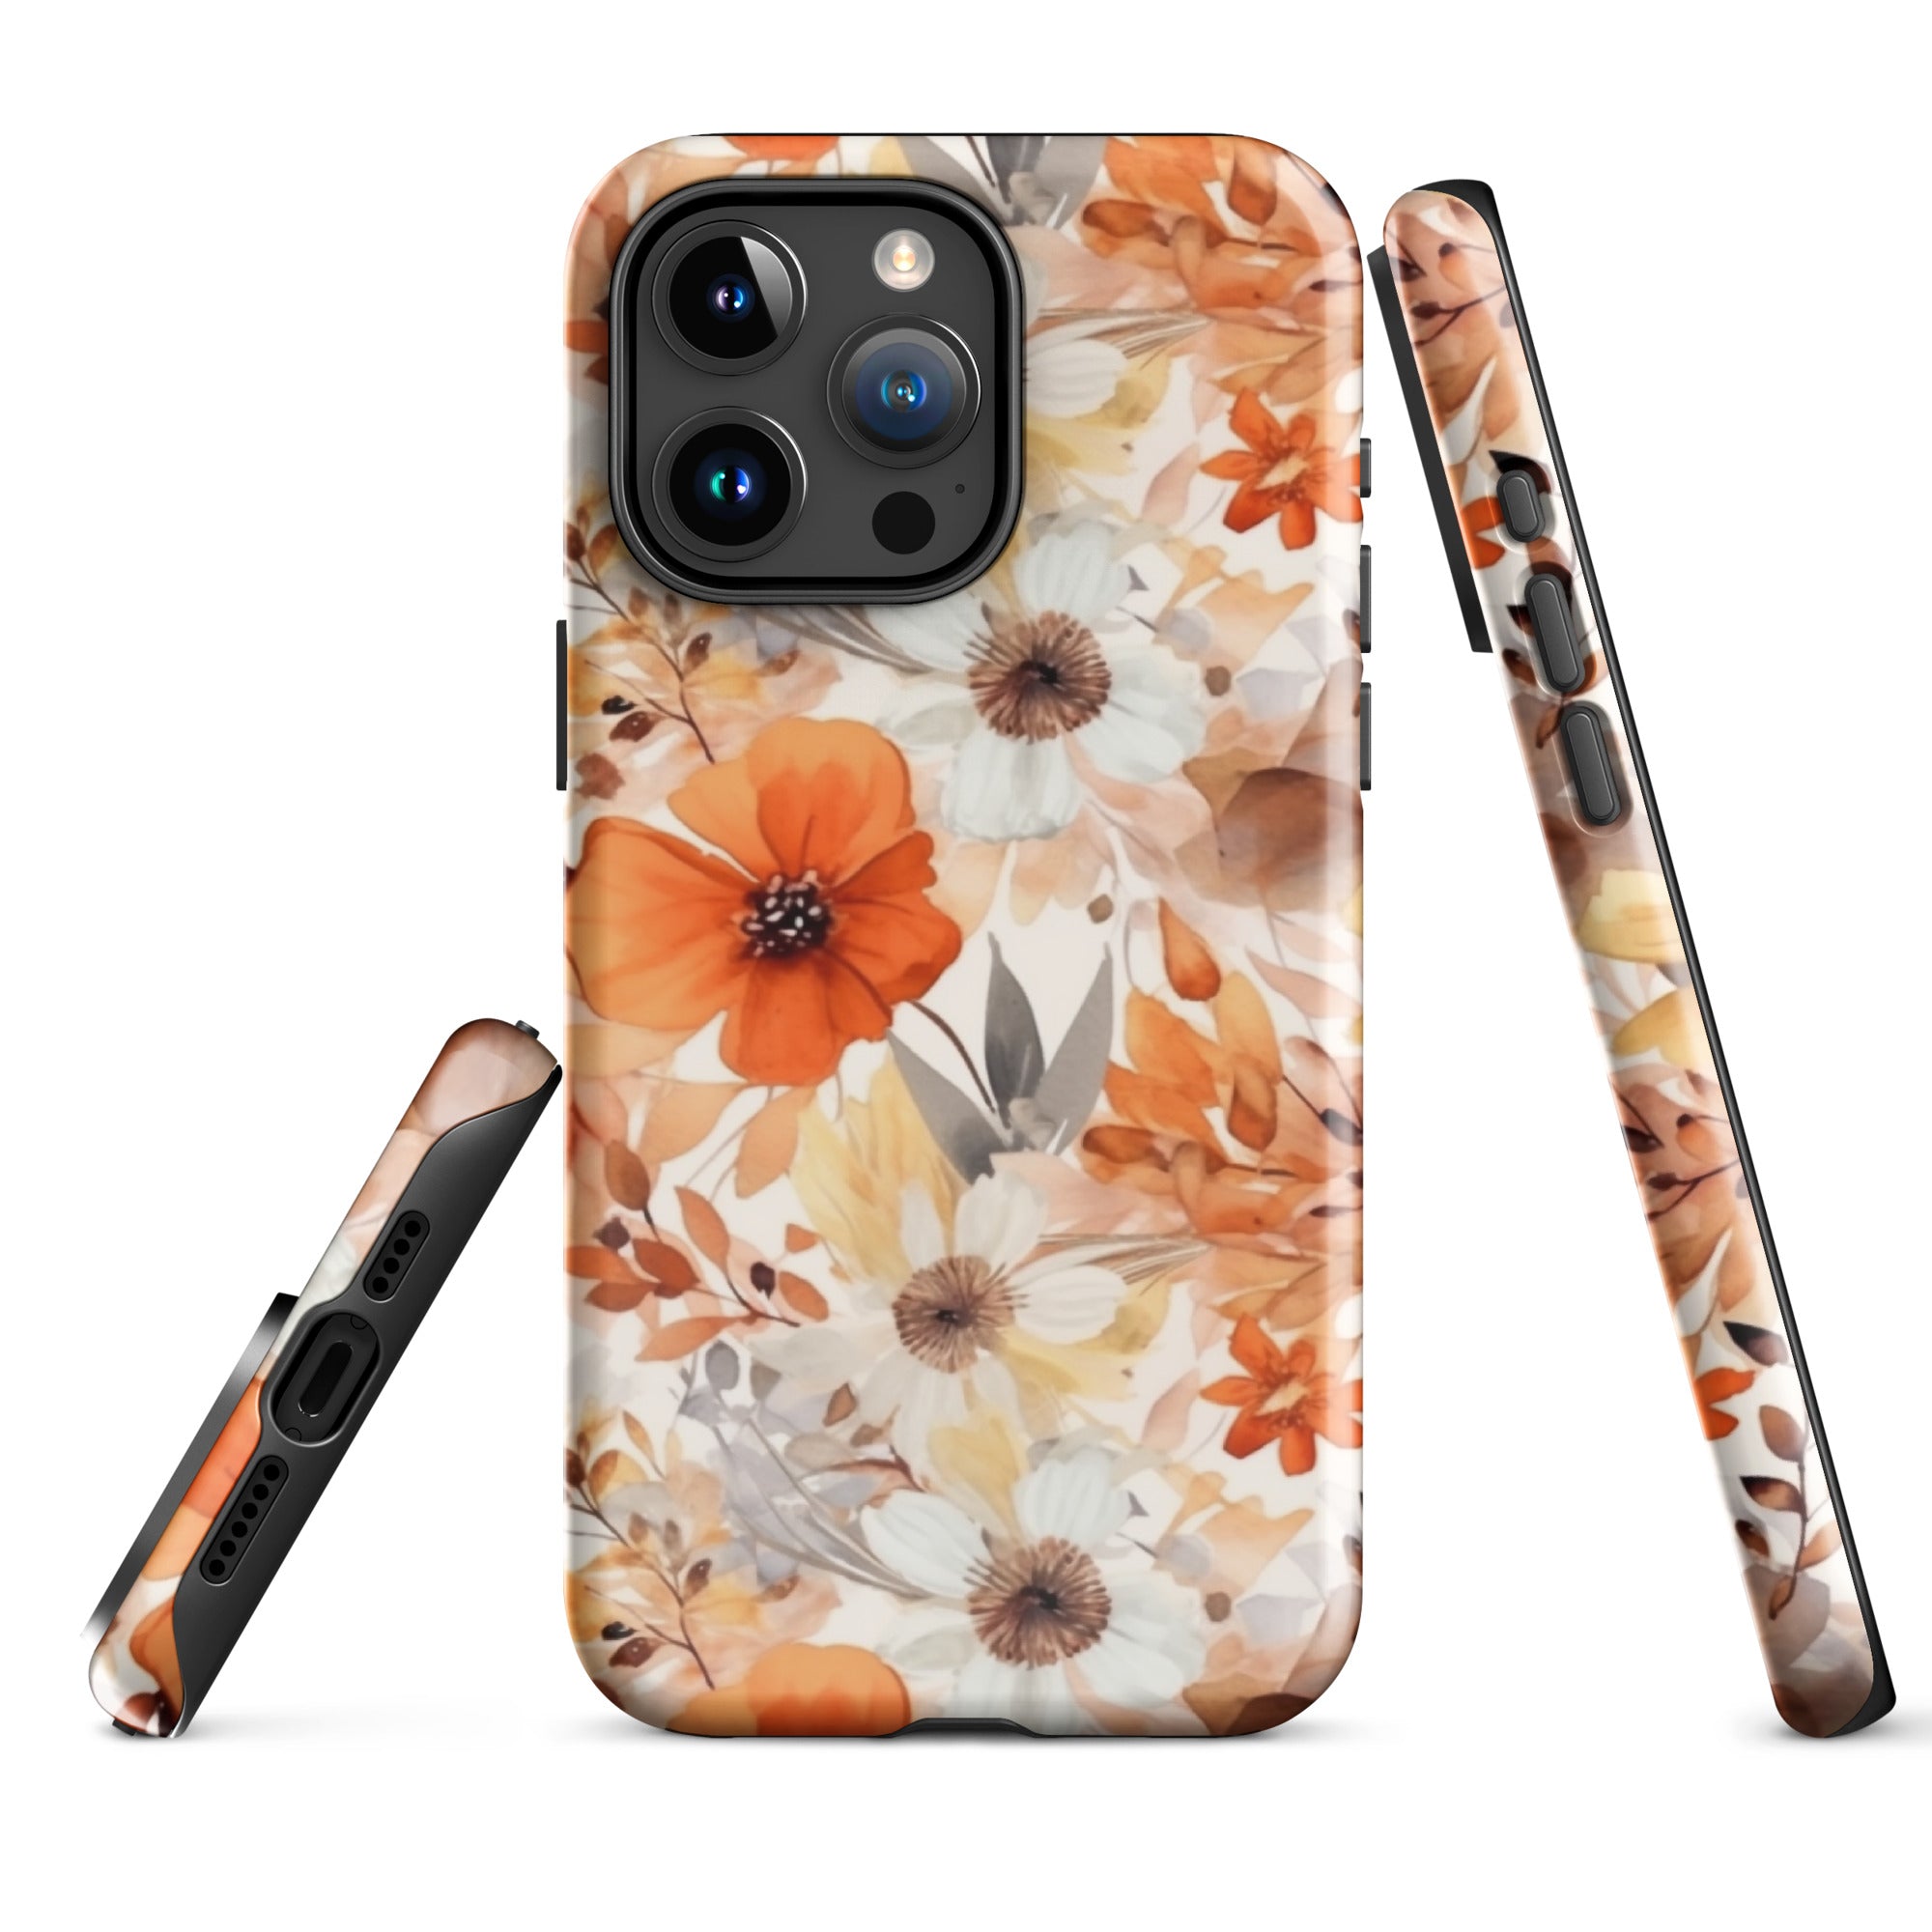 Tough Case for iPhone - Floral